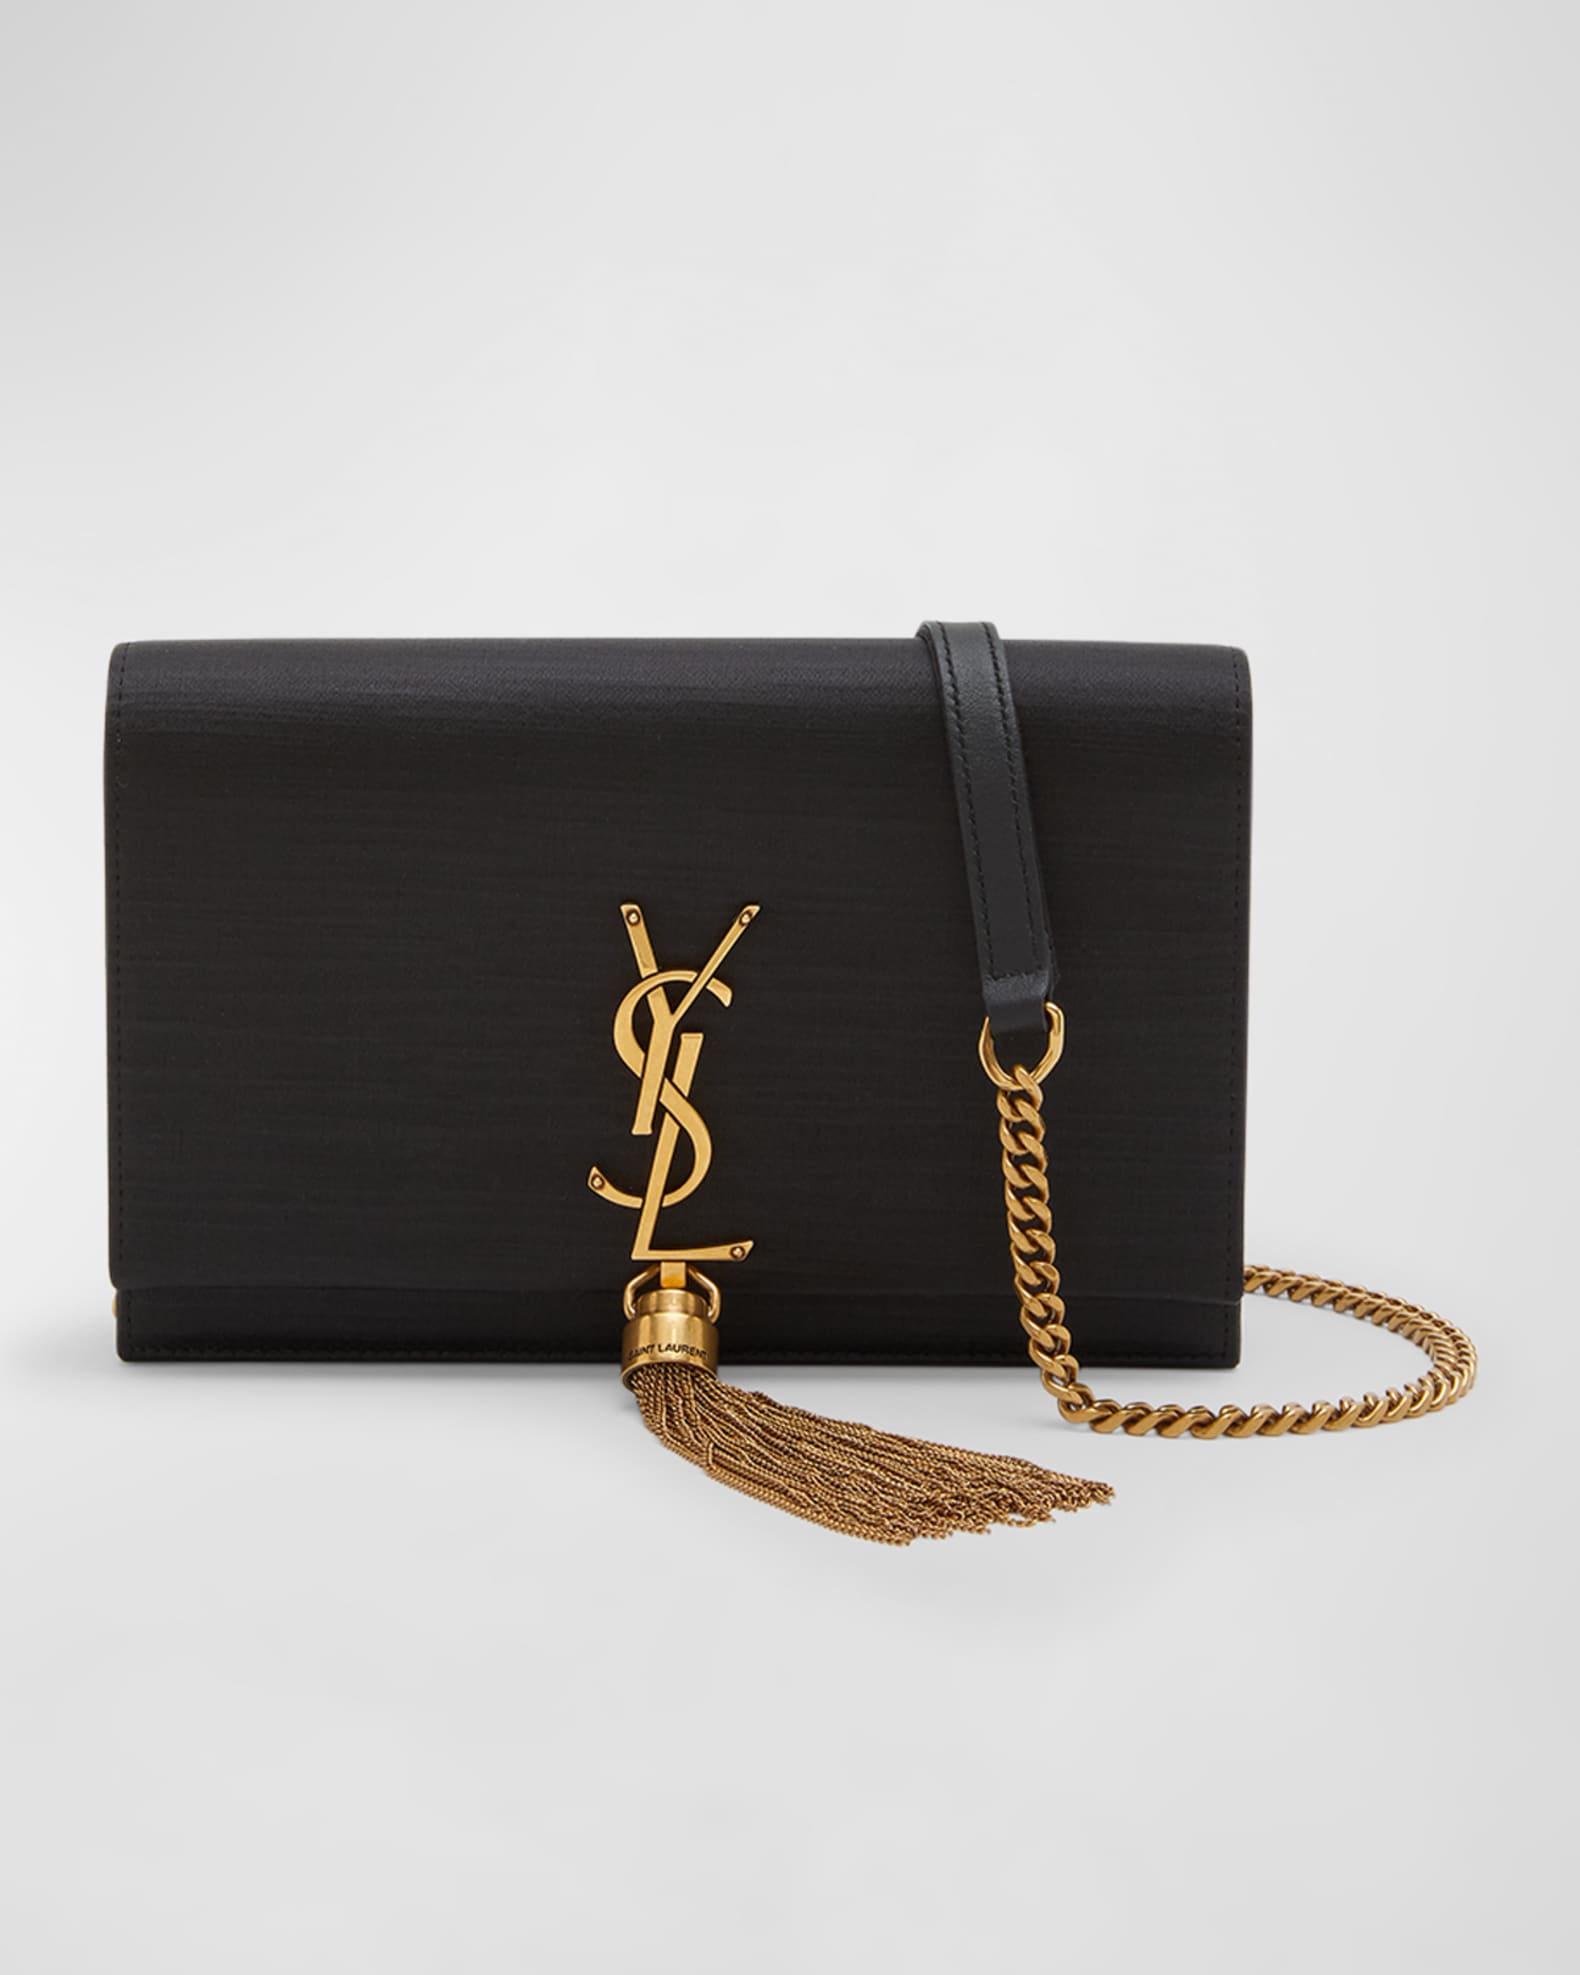 Where to buy a chain strap to match YSL antique gold hardware?